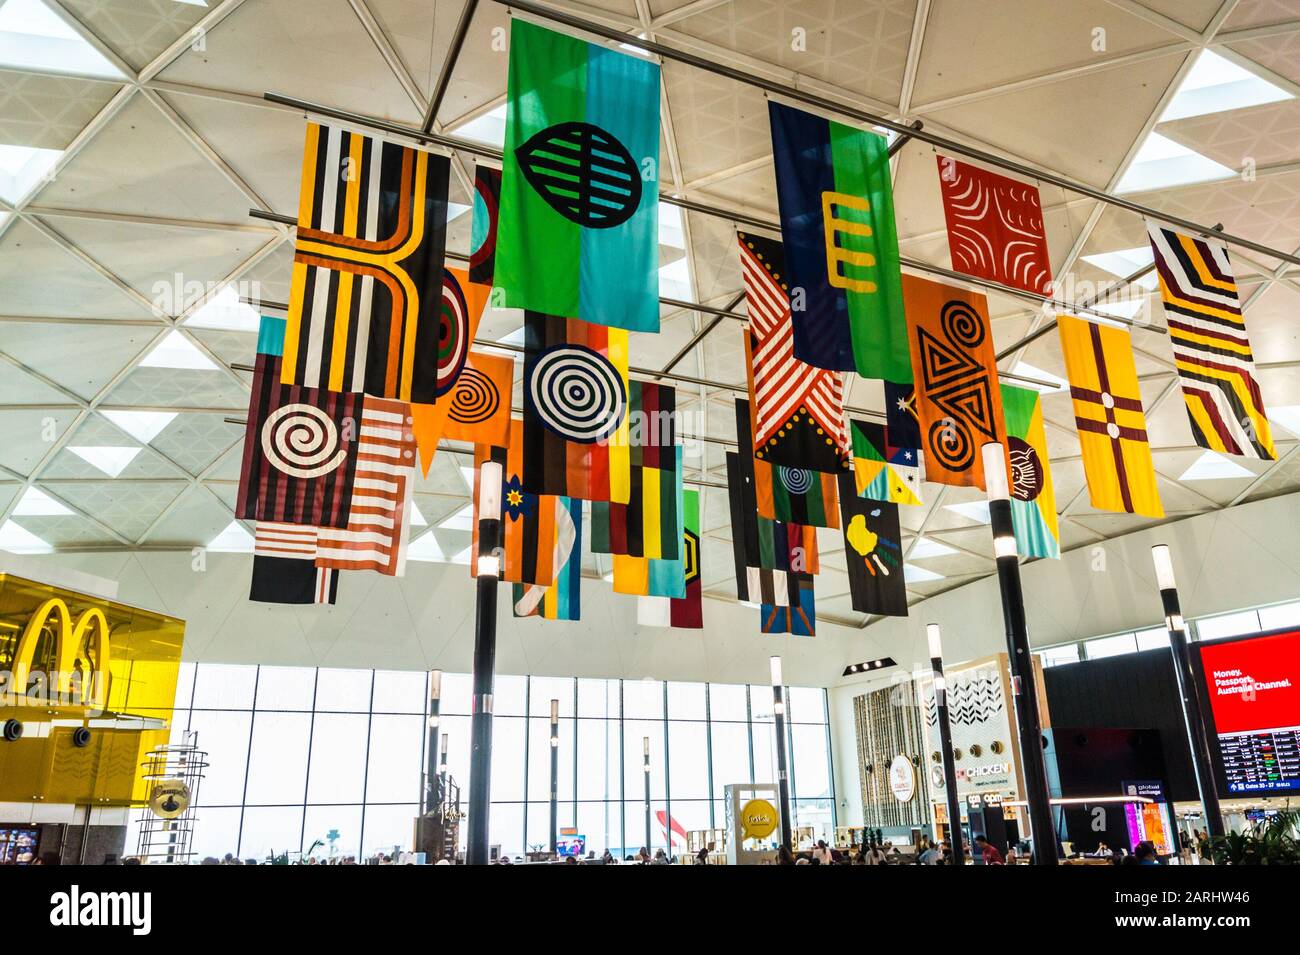 First Nation Flags installation by Archie Moore, 2018, Sydney airport international departures terminal 1, Sydney, Australia Stock Photo